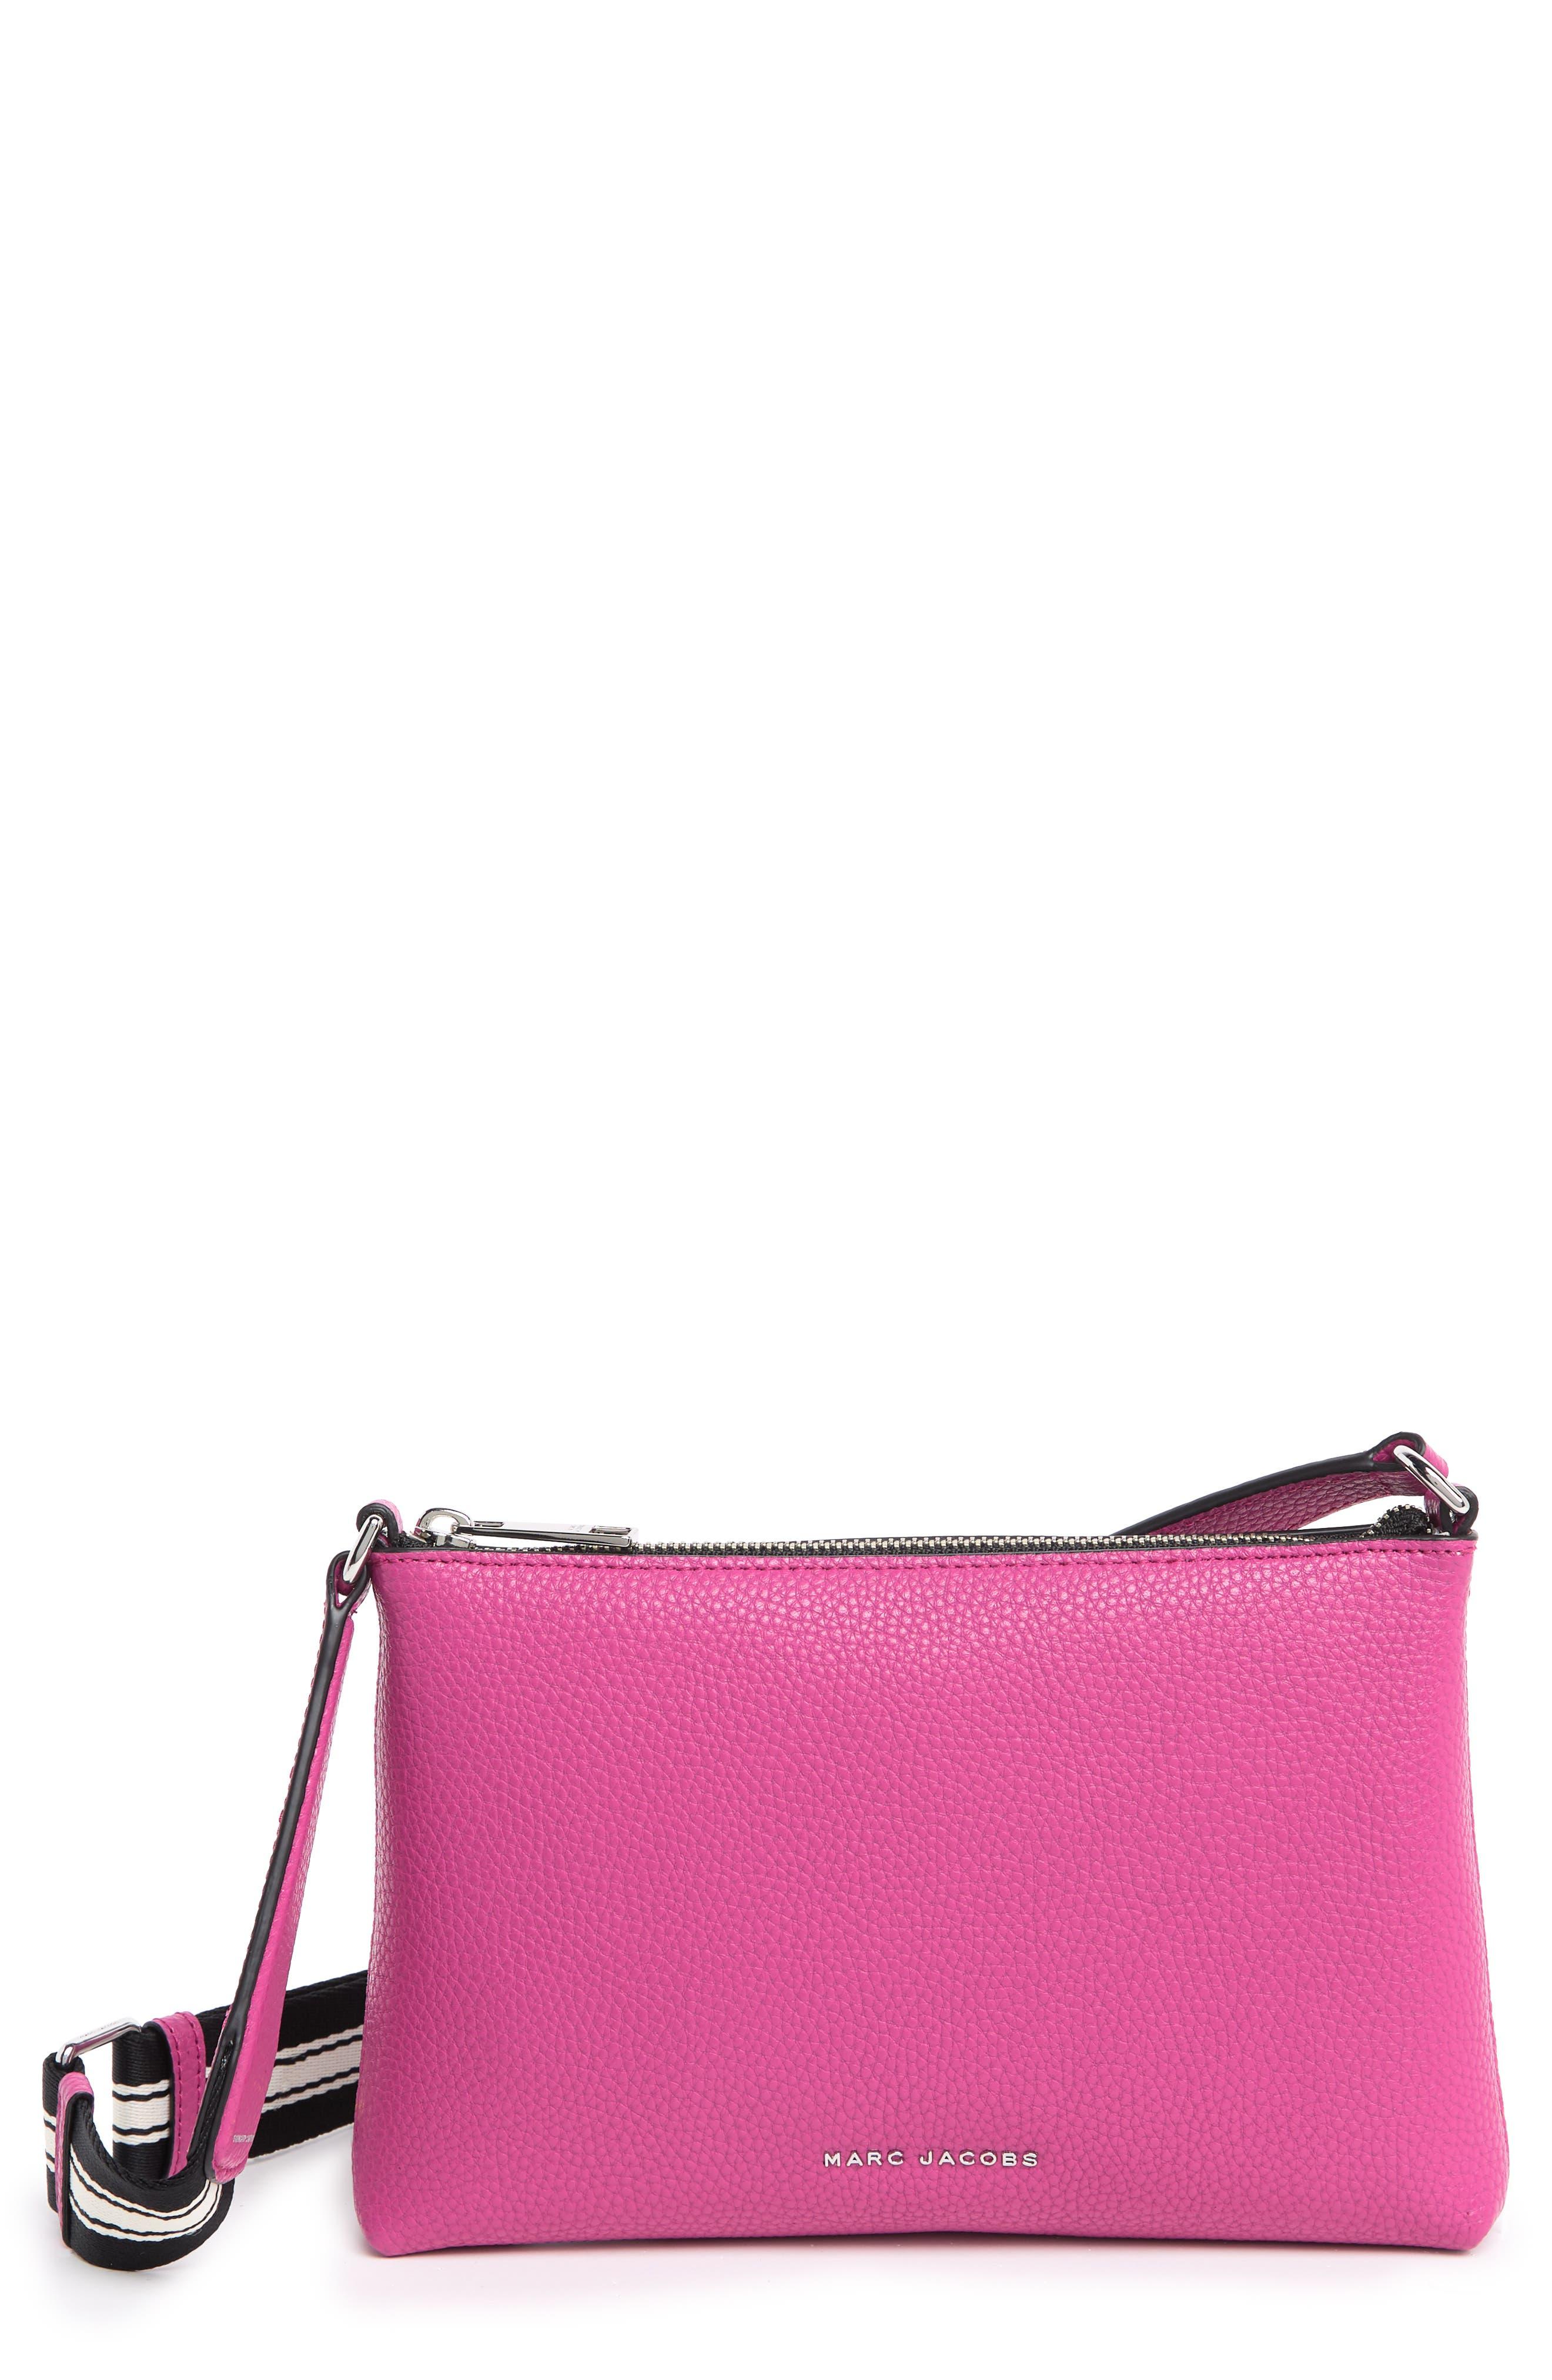 Marc Jacobs The Cosmo Leather Crossbody Bag in Pink | Lyst